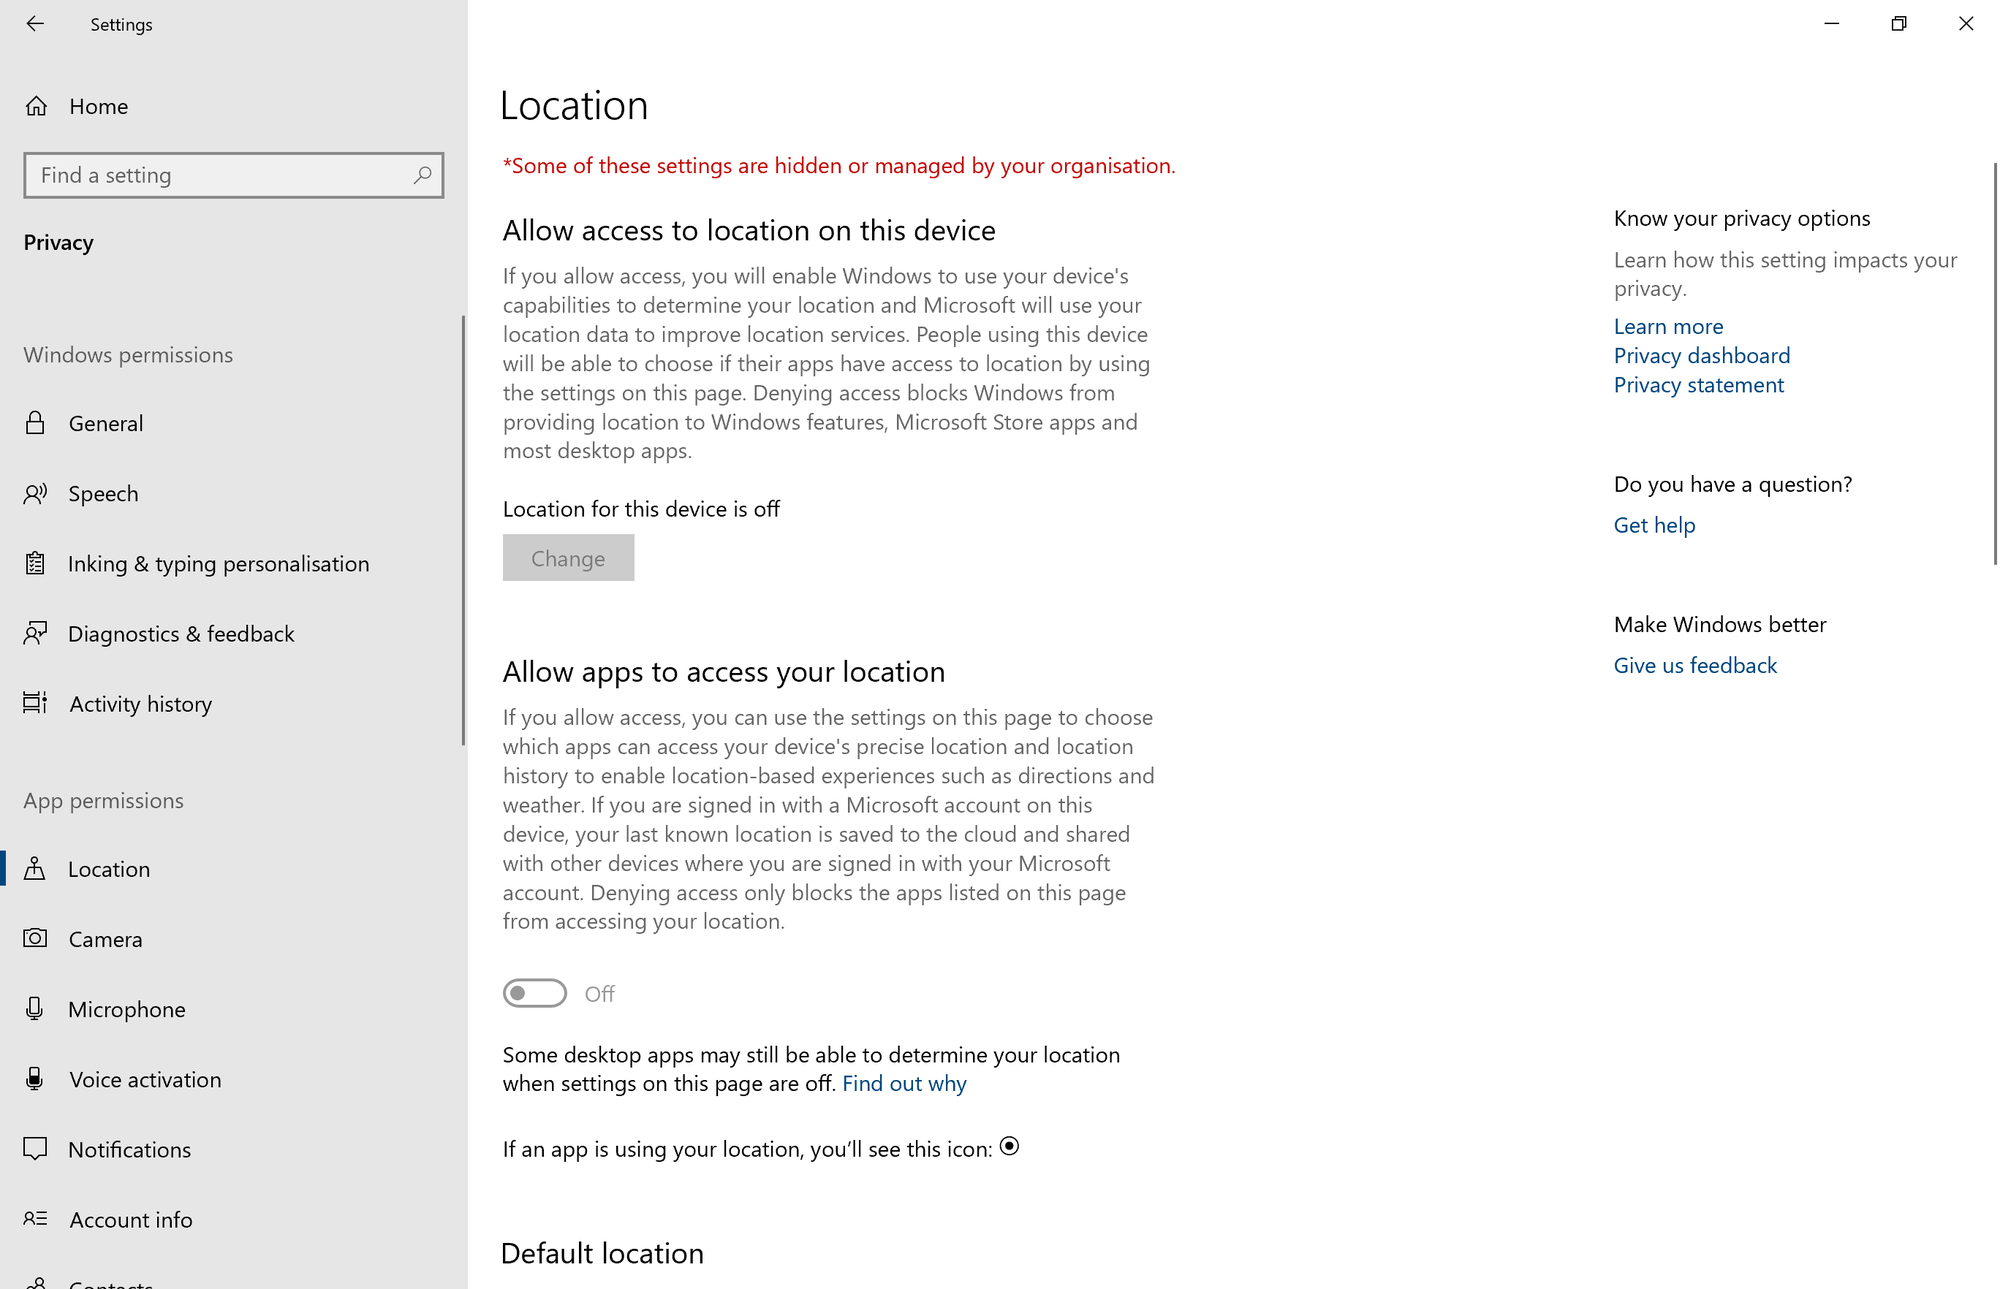 How to enable location services? 69d59f7e-fa92-4f56-96e4-00fdc4bda6ff?upload=true.png